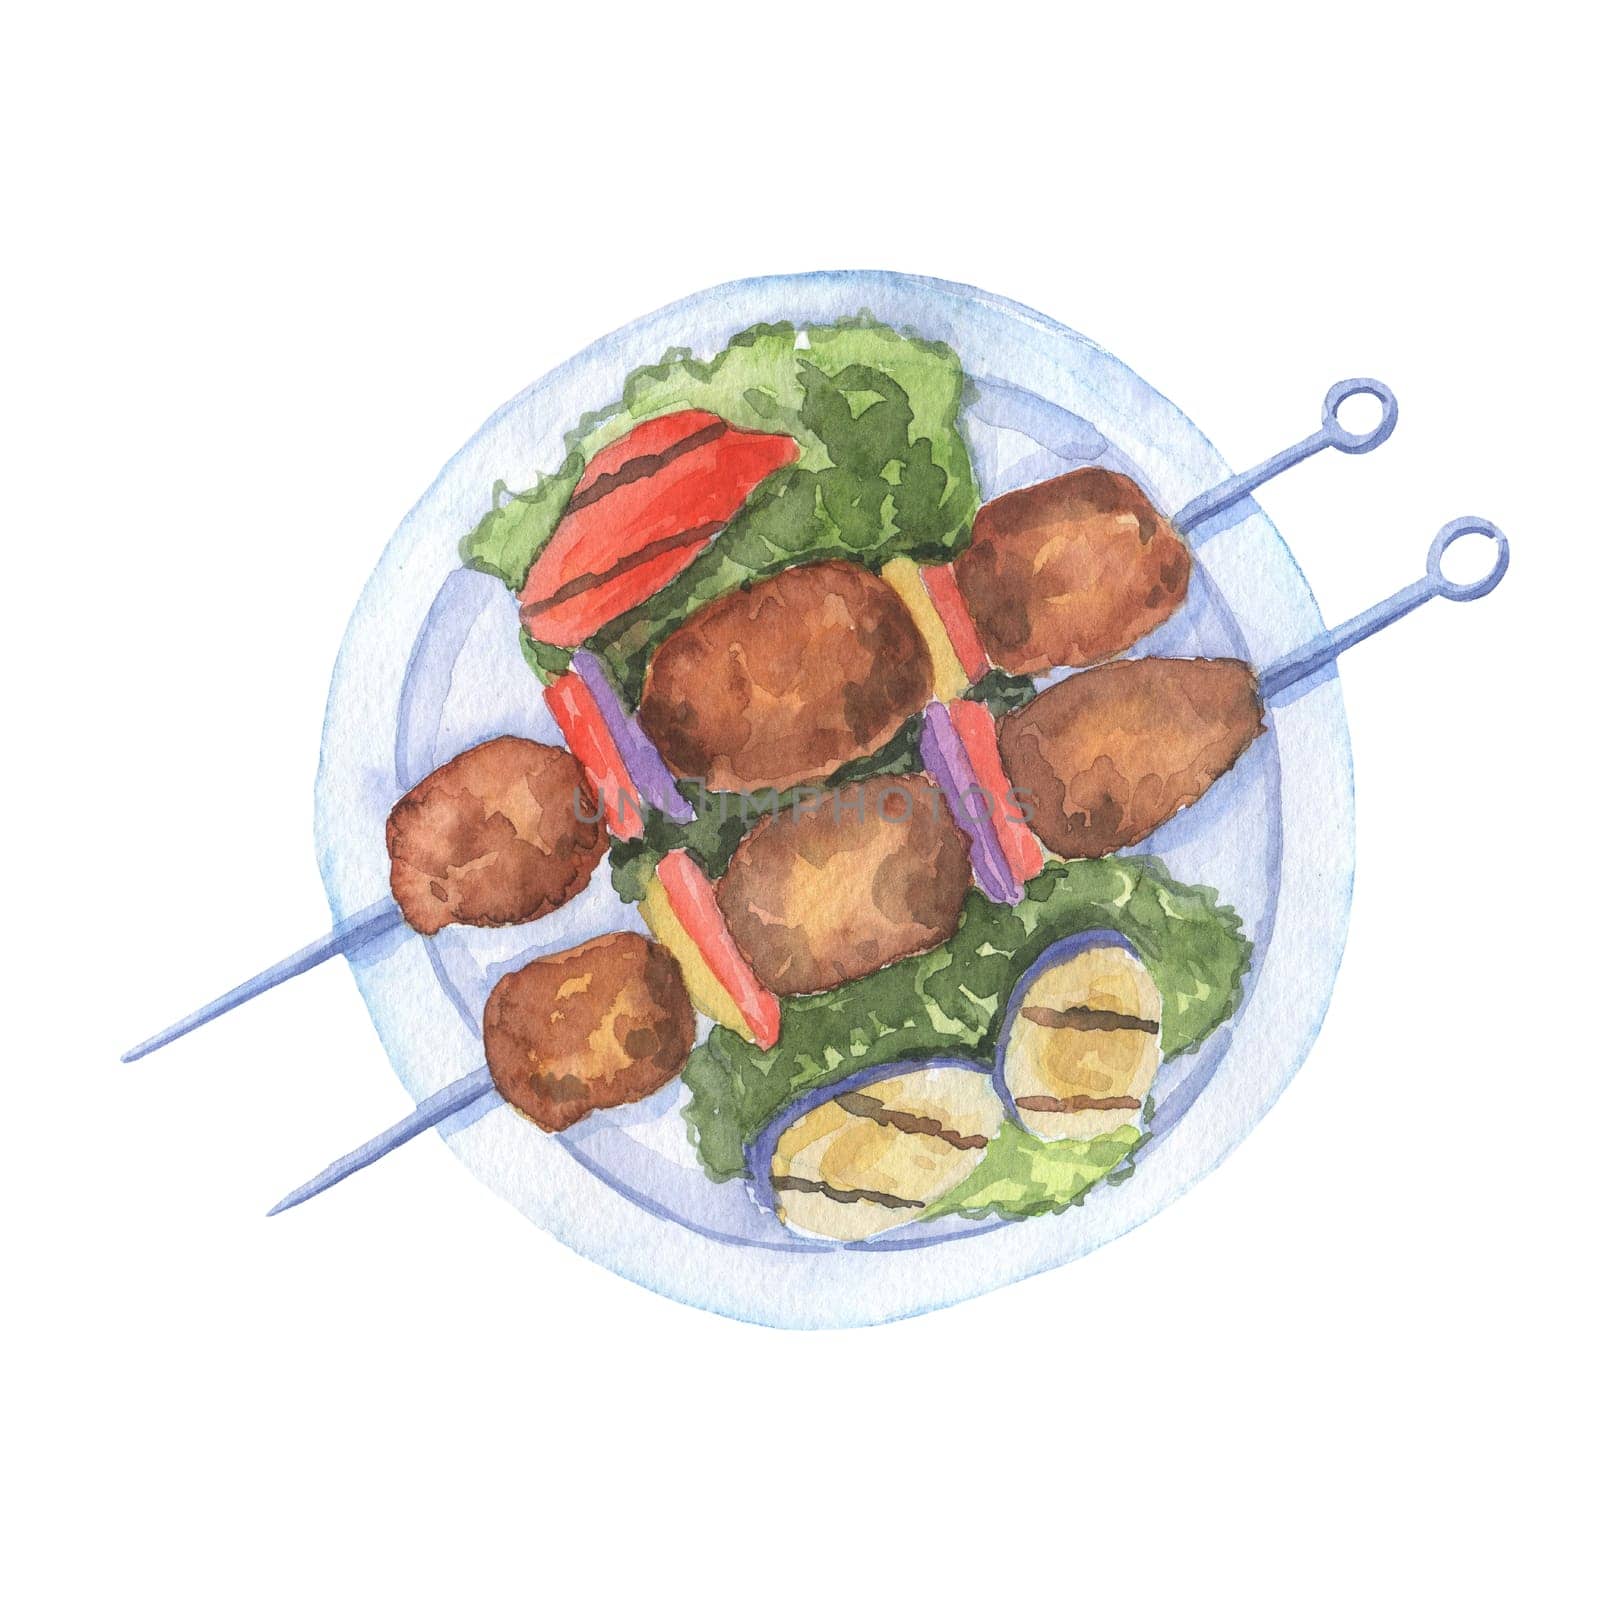 Meat kebab. Cooked picnic vegetables and Grilled meat isolated on white. Barbecue illustration by ElenaPlatova